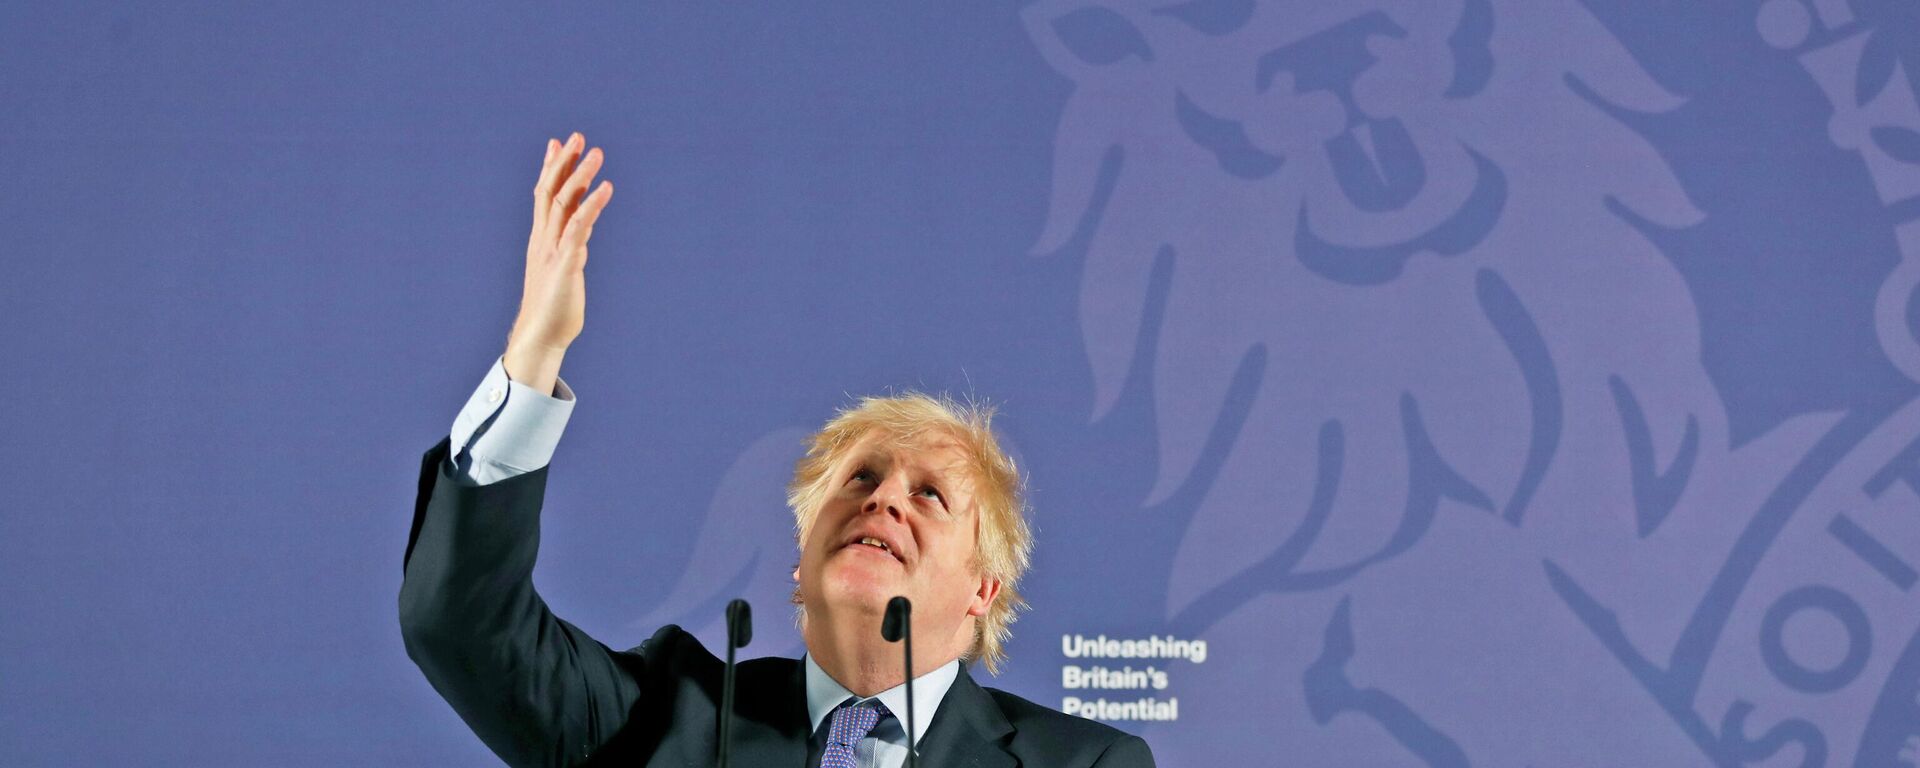 British Prime Minister Boris Johnson outlines his government's negotiating stance with the European Union after Brexit, during a key speech at the Old Naval College in Greenwich, London, Monday, Feb. 3, 2020 - Sputnik International, 1920, 22.10.2022